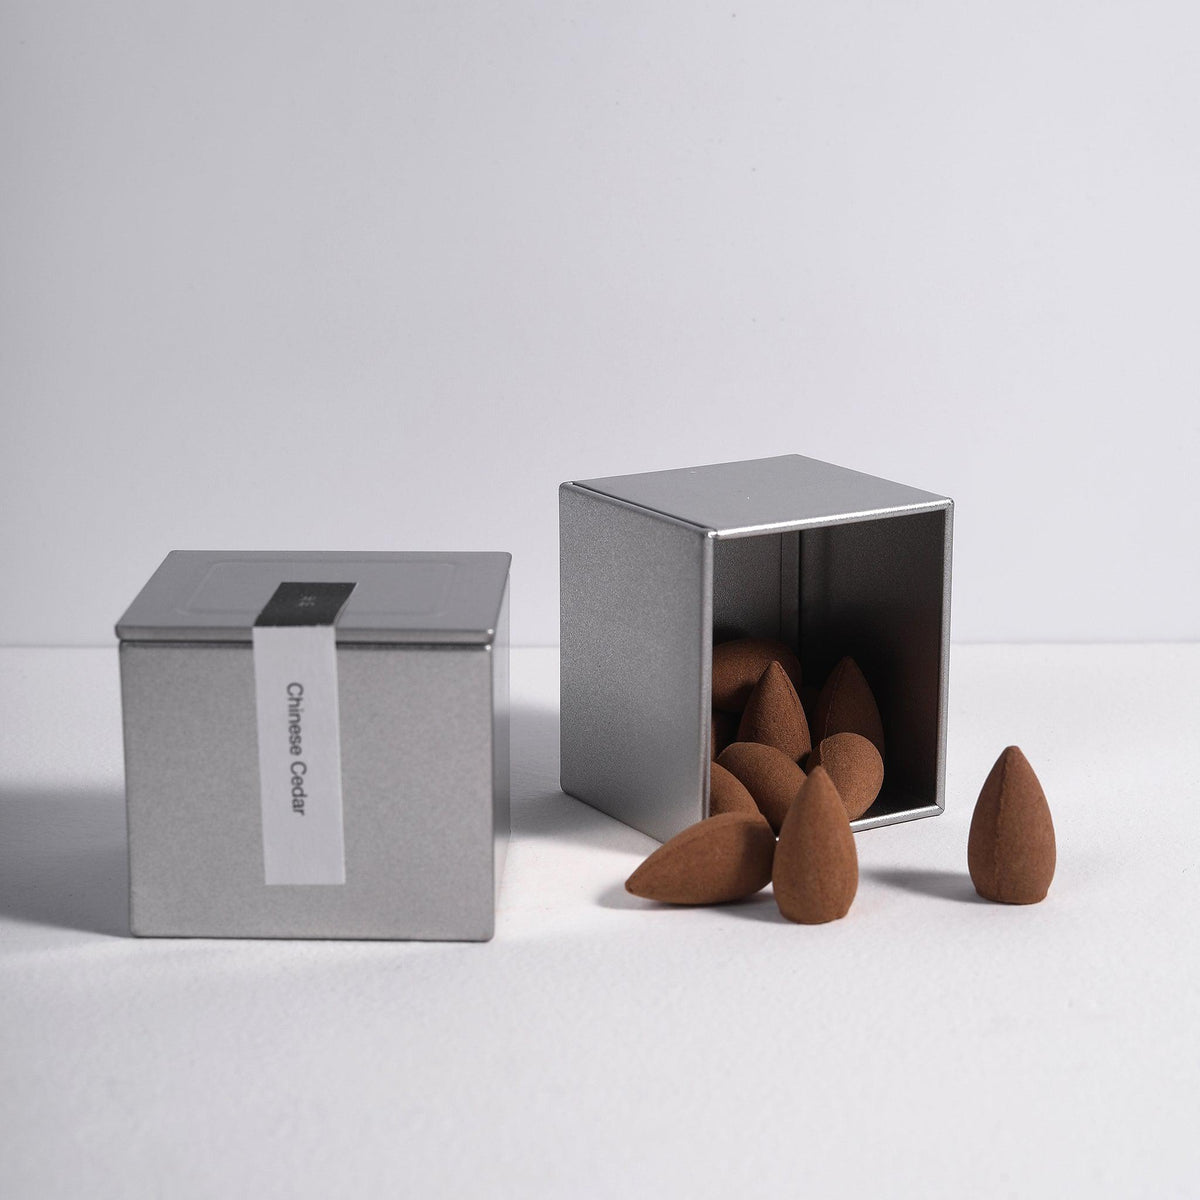 Backflow Incense Cones by Kin Objects with Box Open